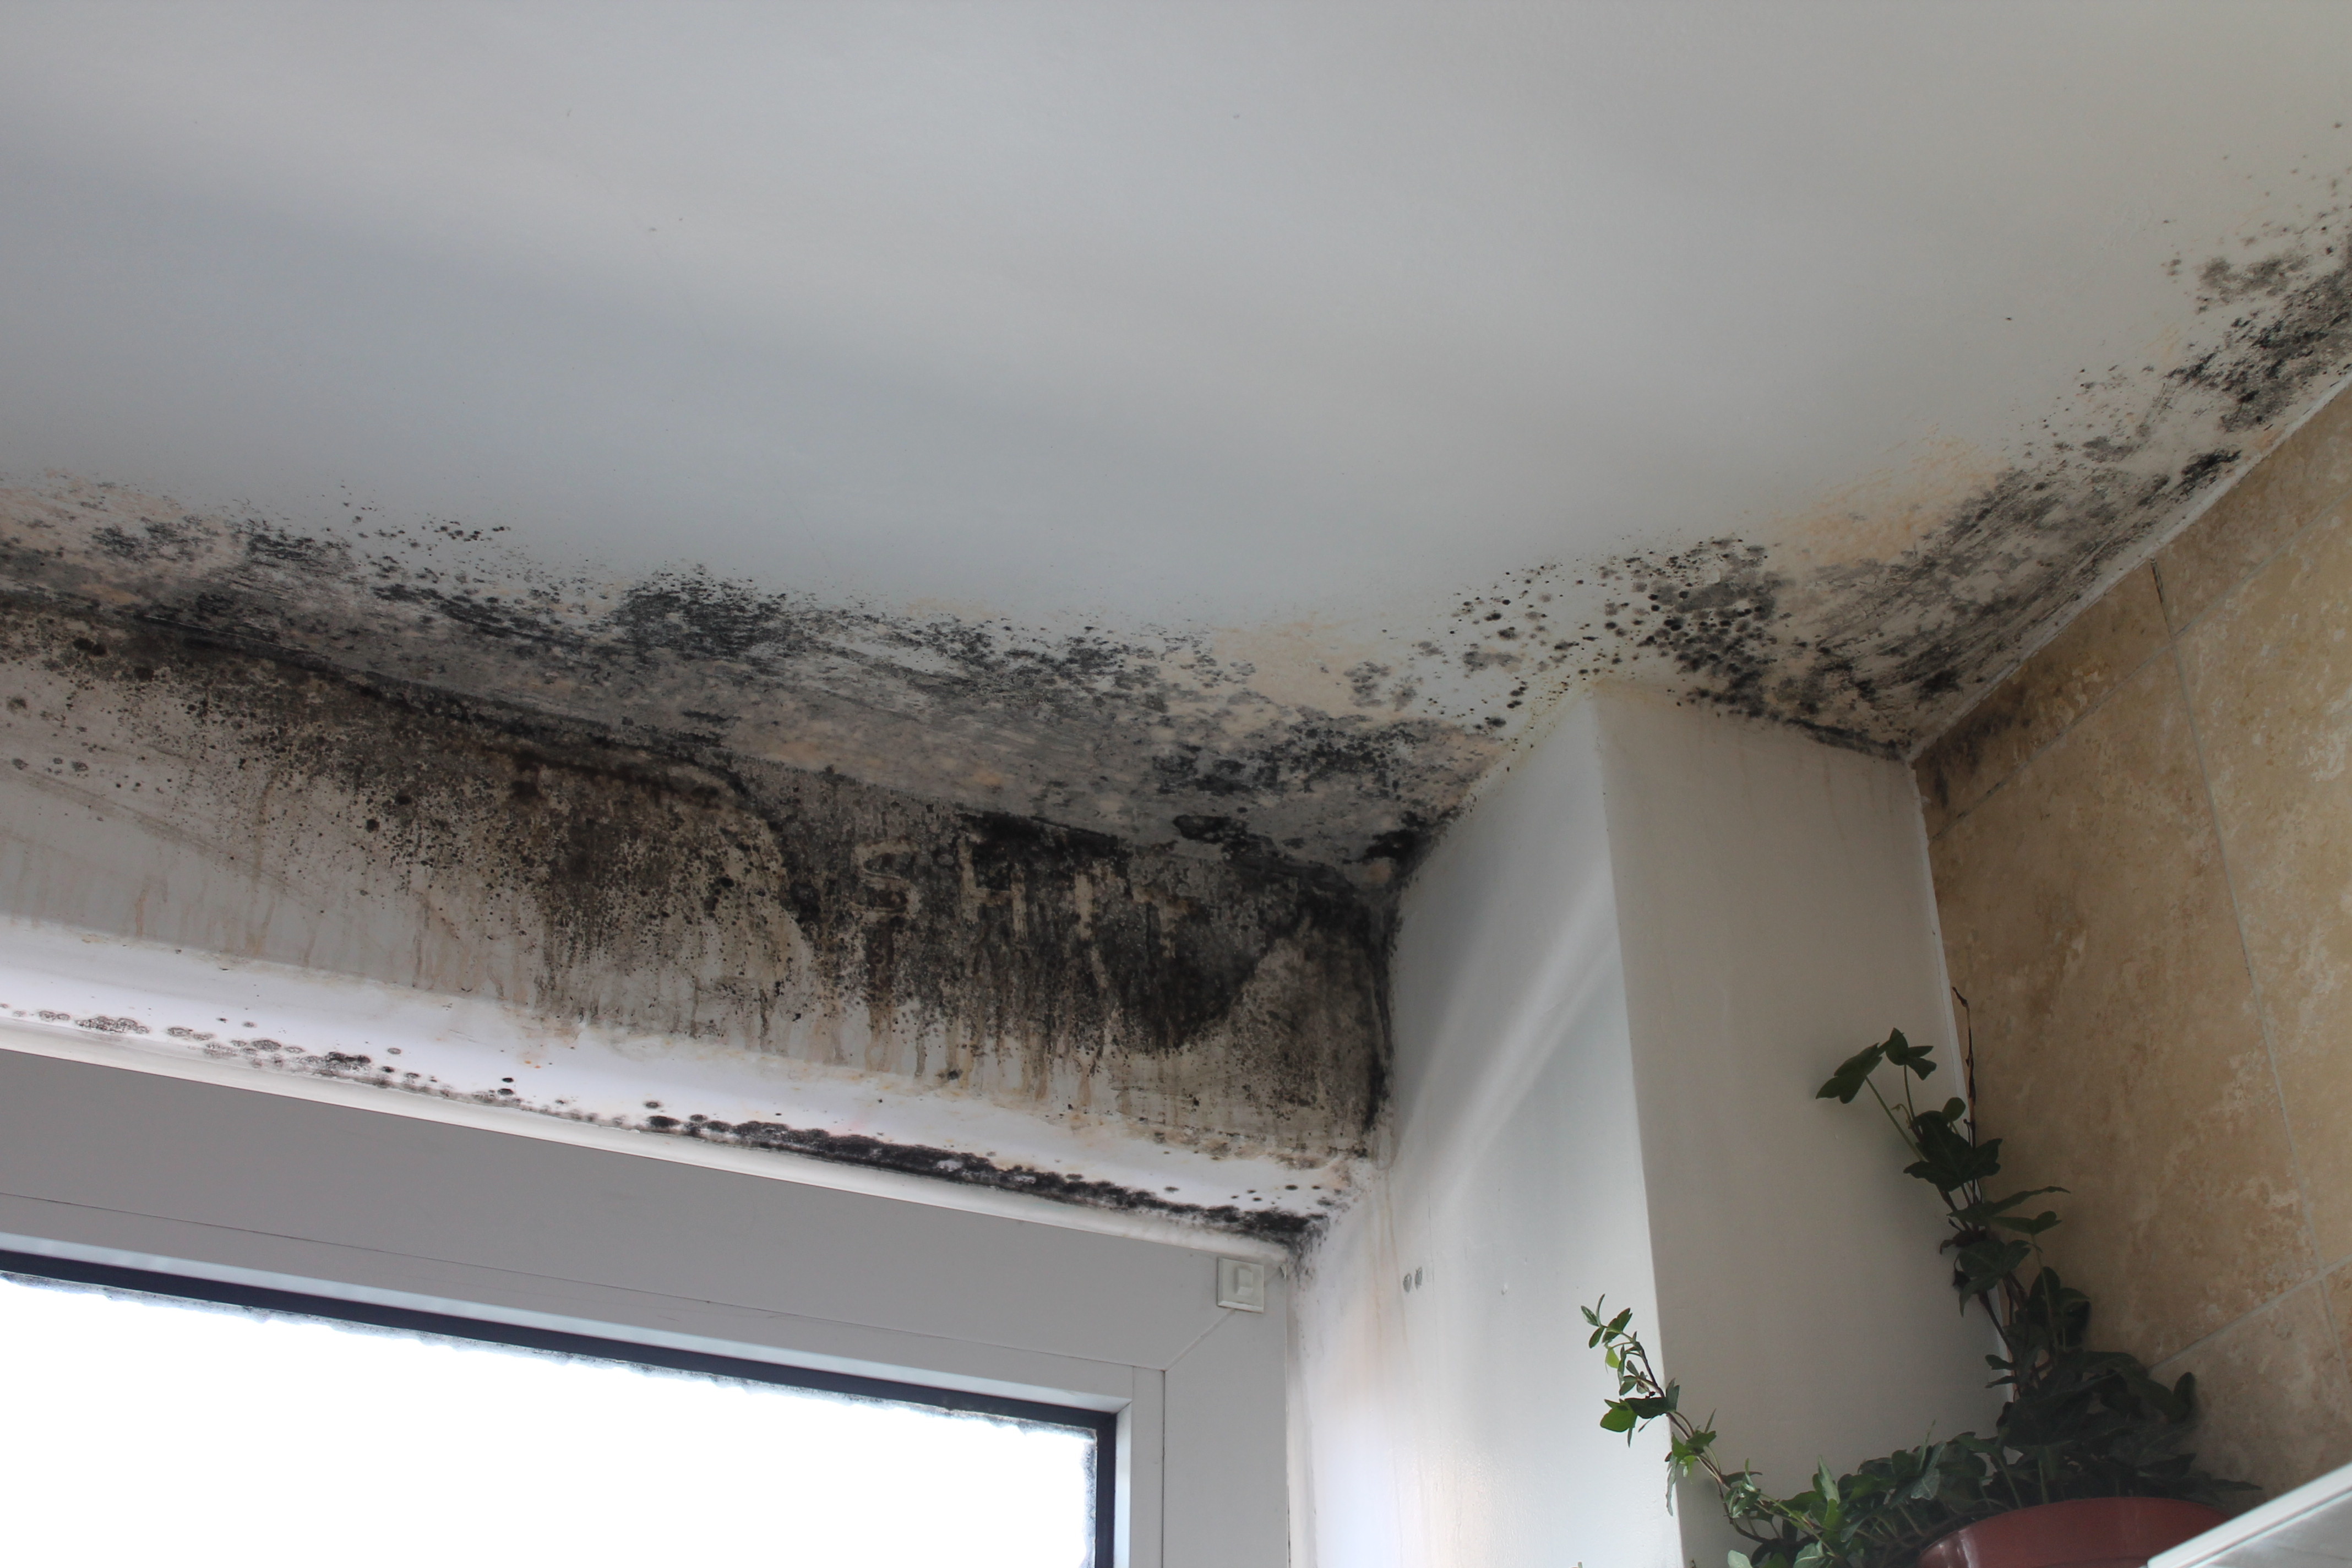 Mold growing on a ceiling.